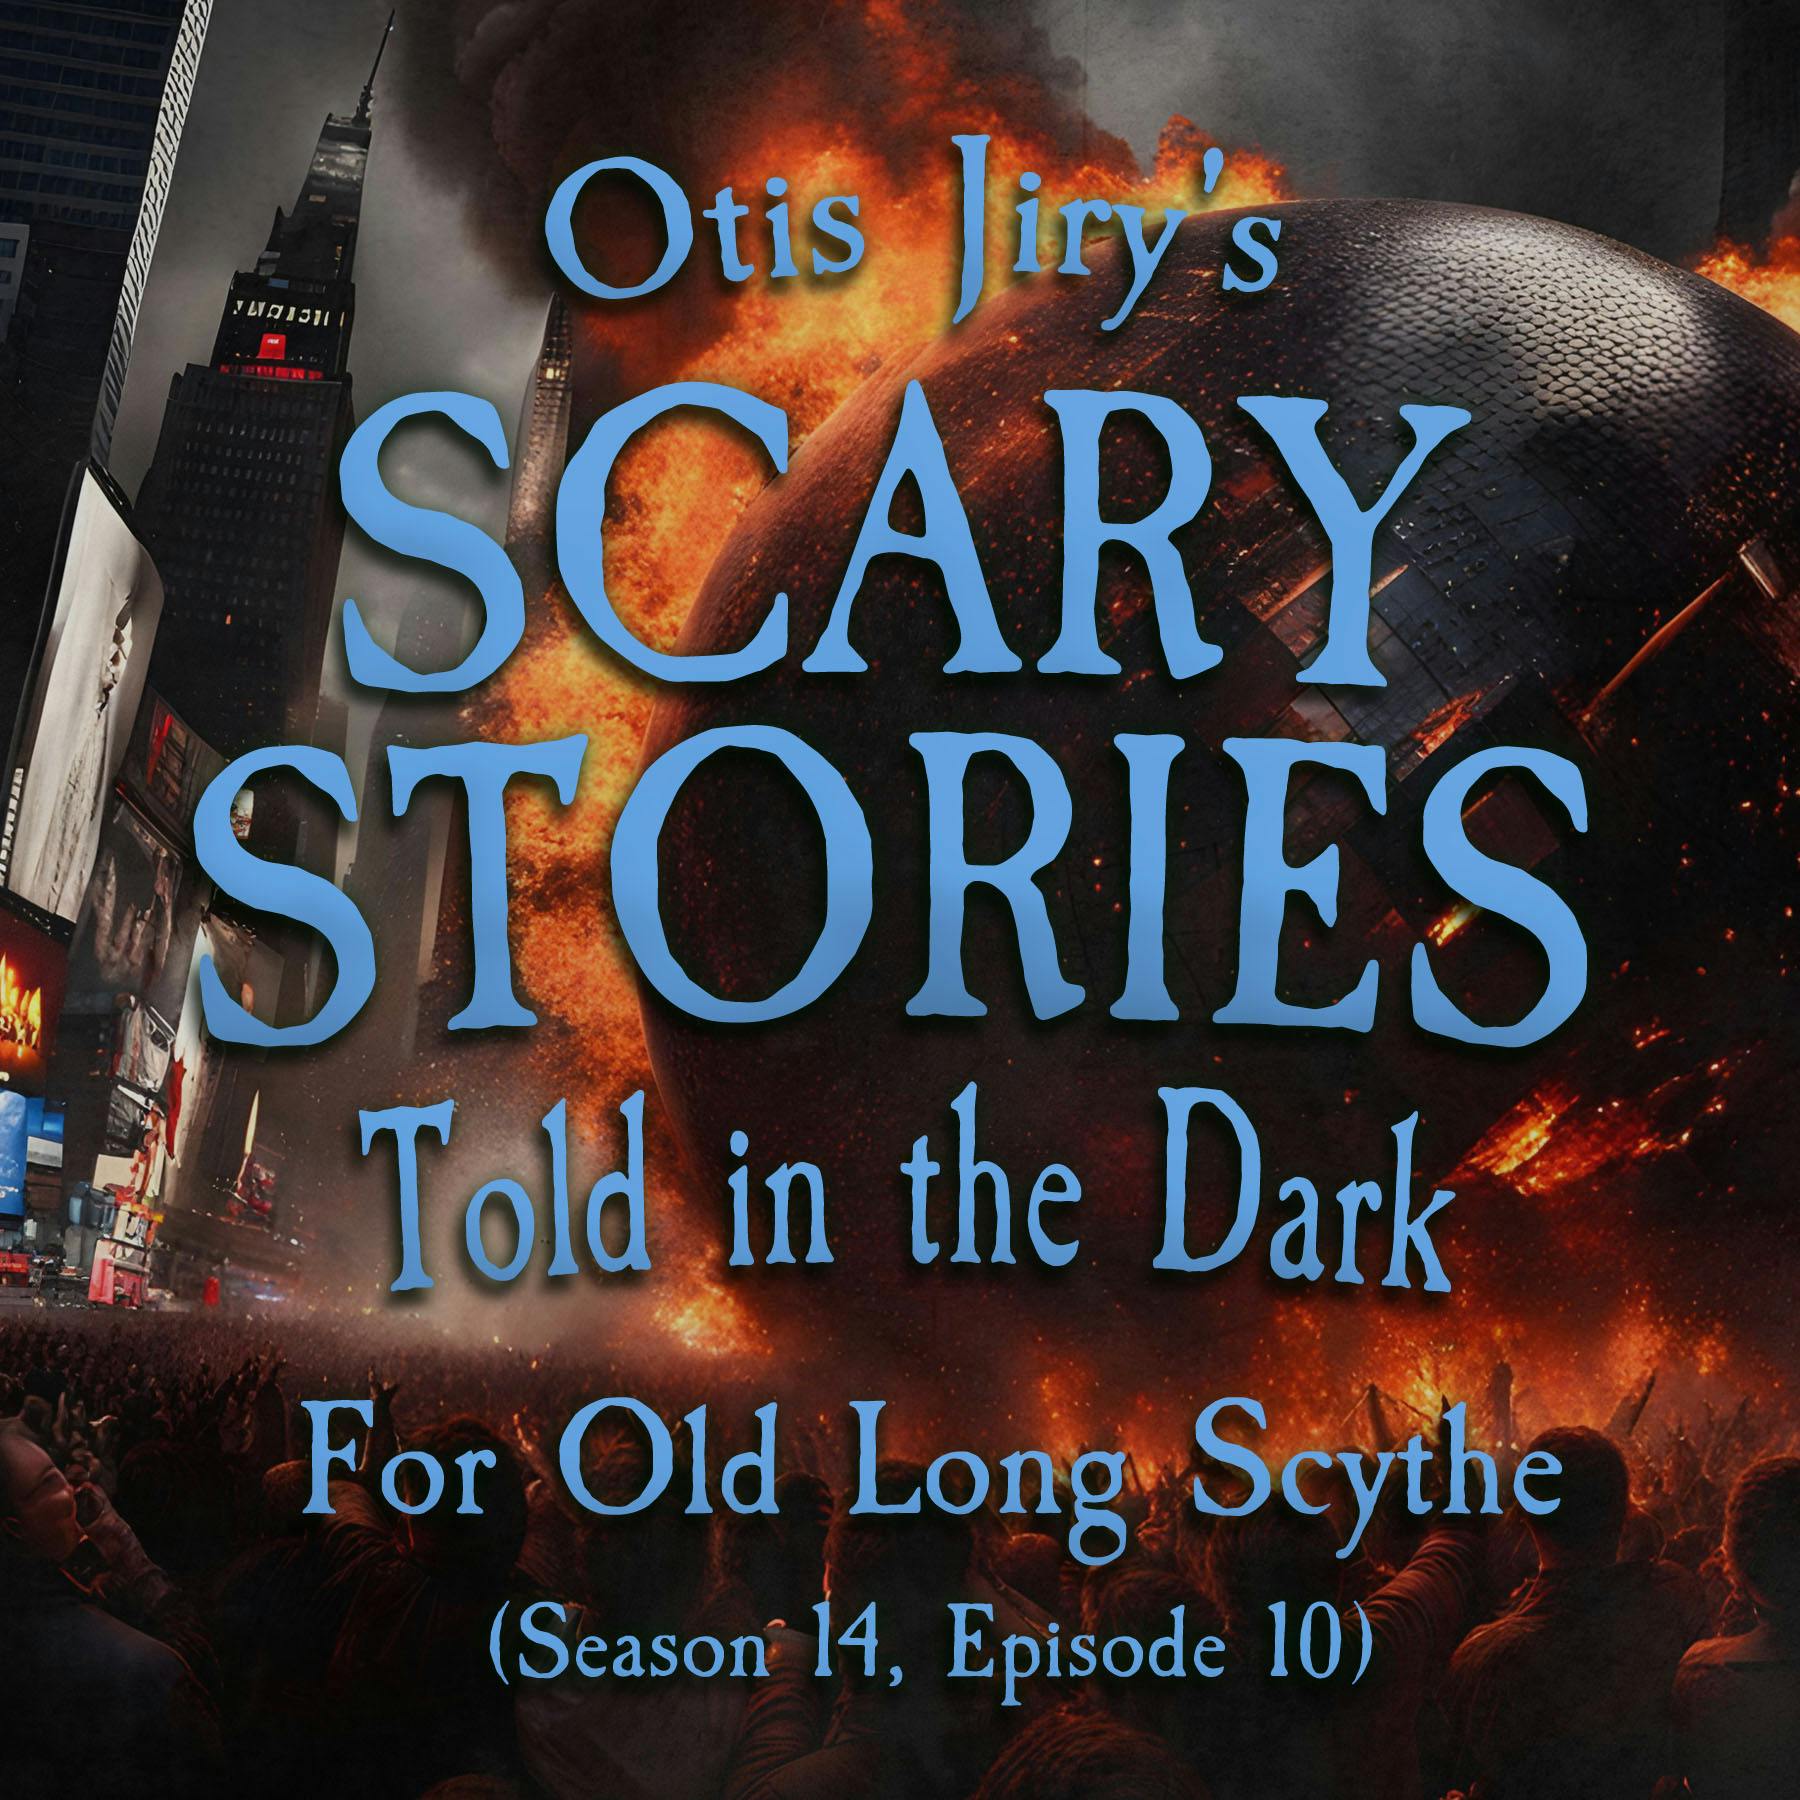 S14E10 - ”For Old Long Scythe” – Scary Stories Told in the Dark